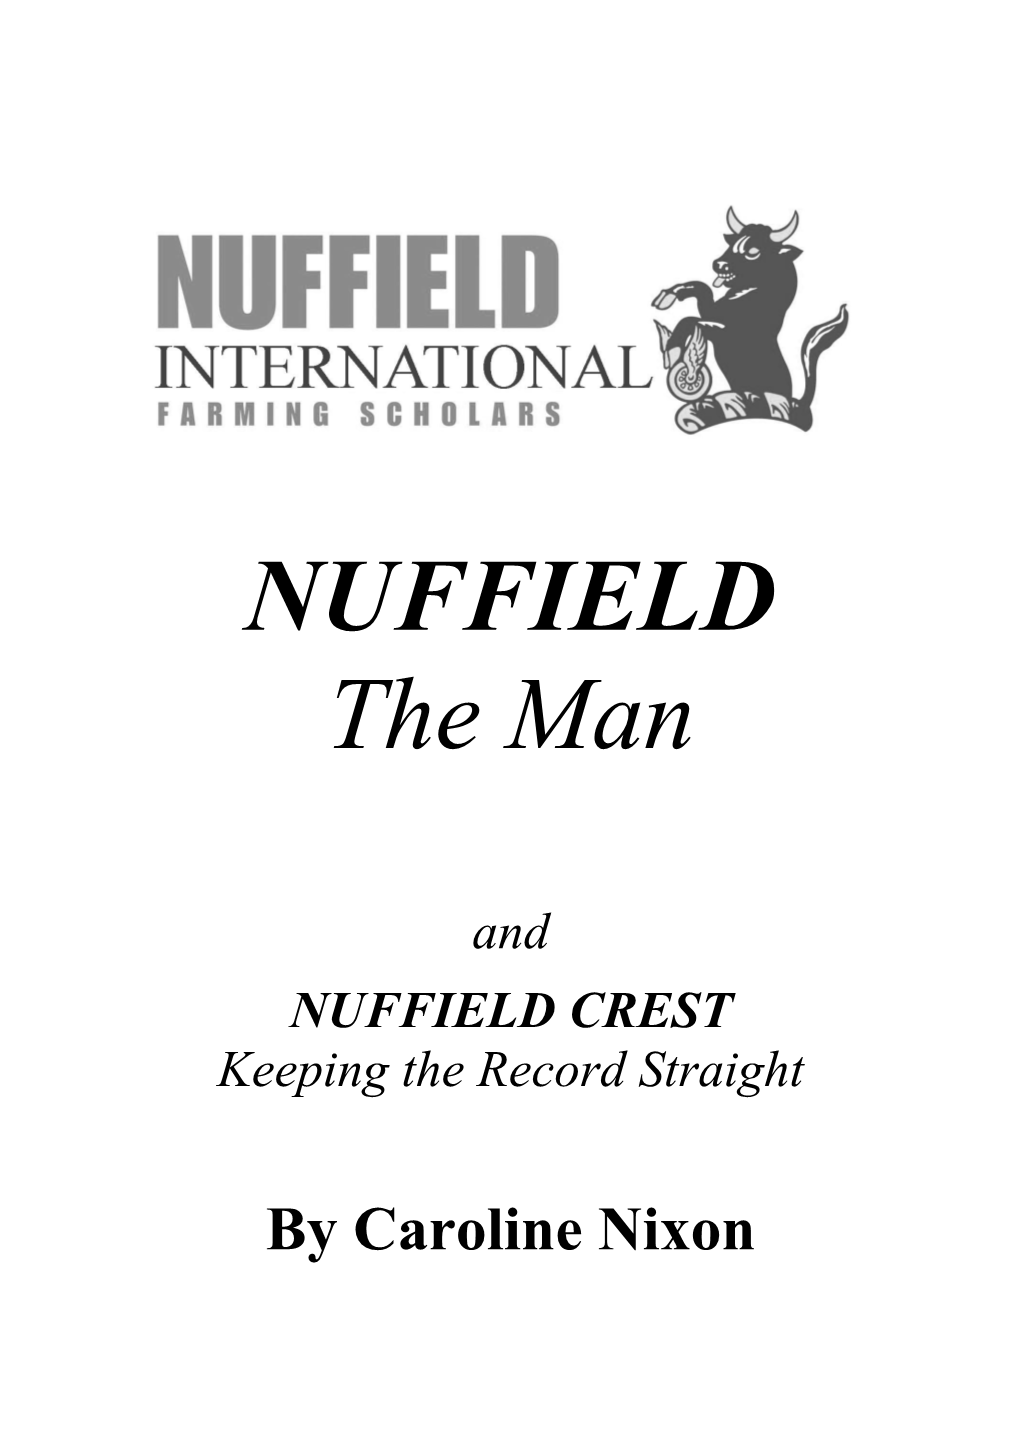 And NUFFIELD CREST Keeping the Record Straight